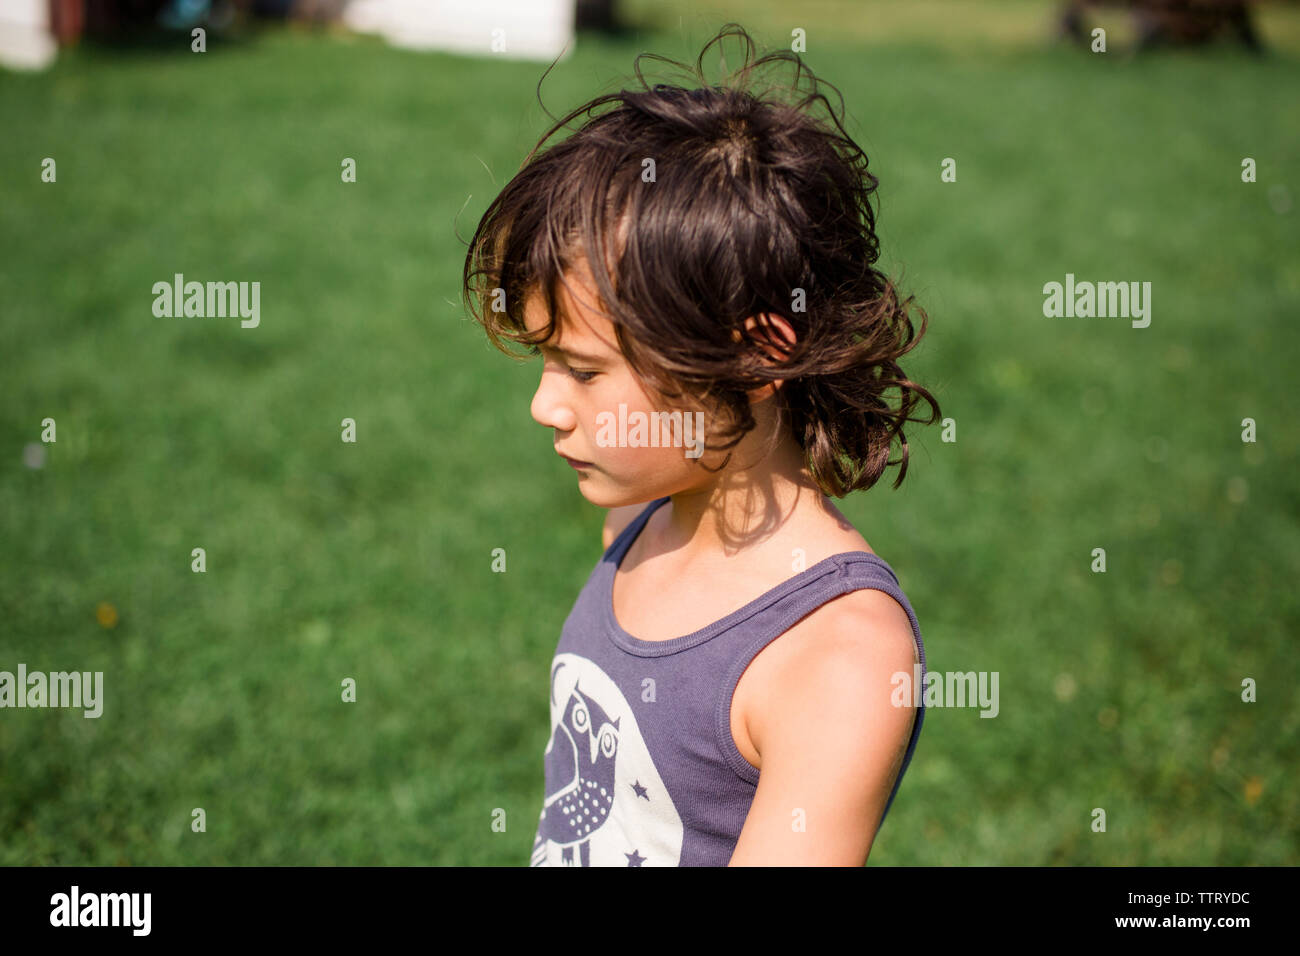 High angle view of thoughtful boy looking away while standing on grassy field in yard during sunny day Stock Photo